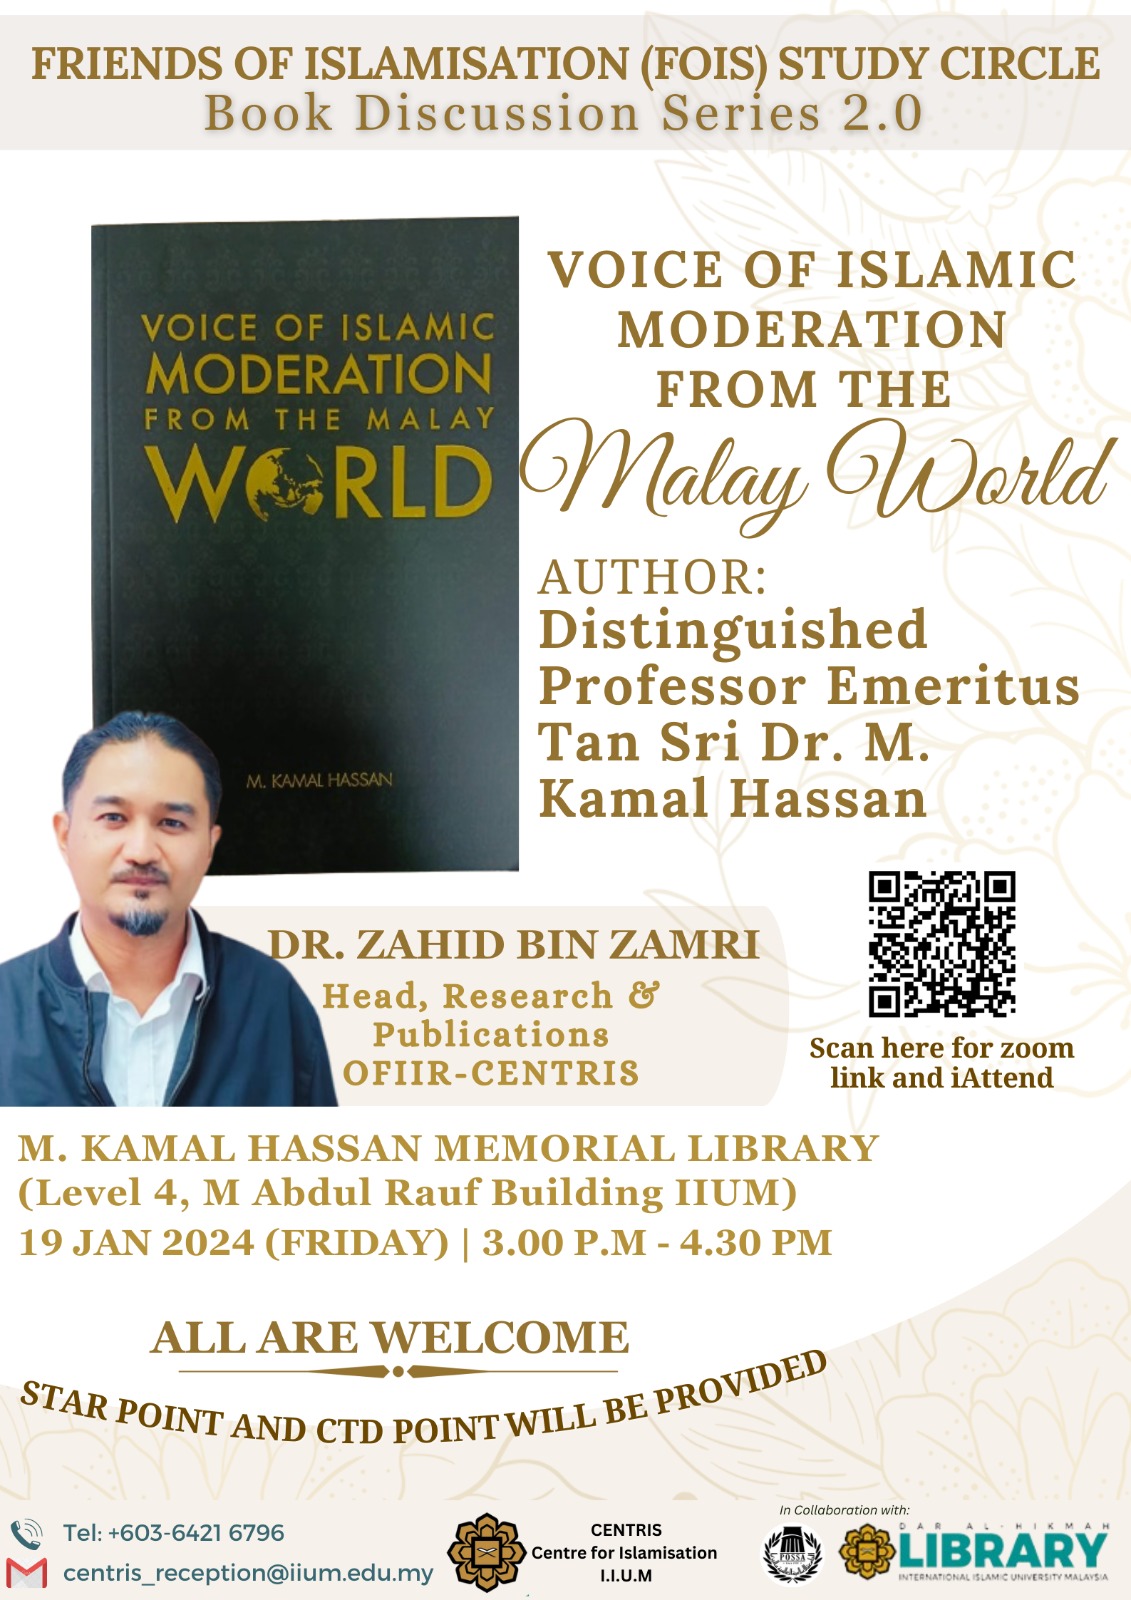 VOICE OF ISLAMIC MODERATION FROM THE MALAY WORLD